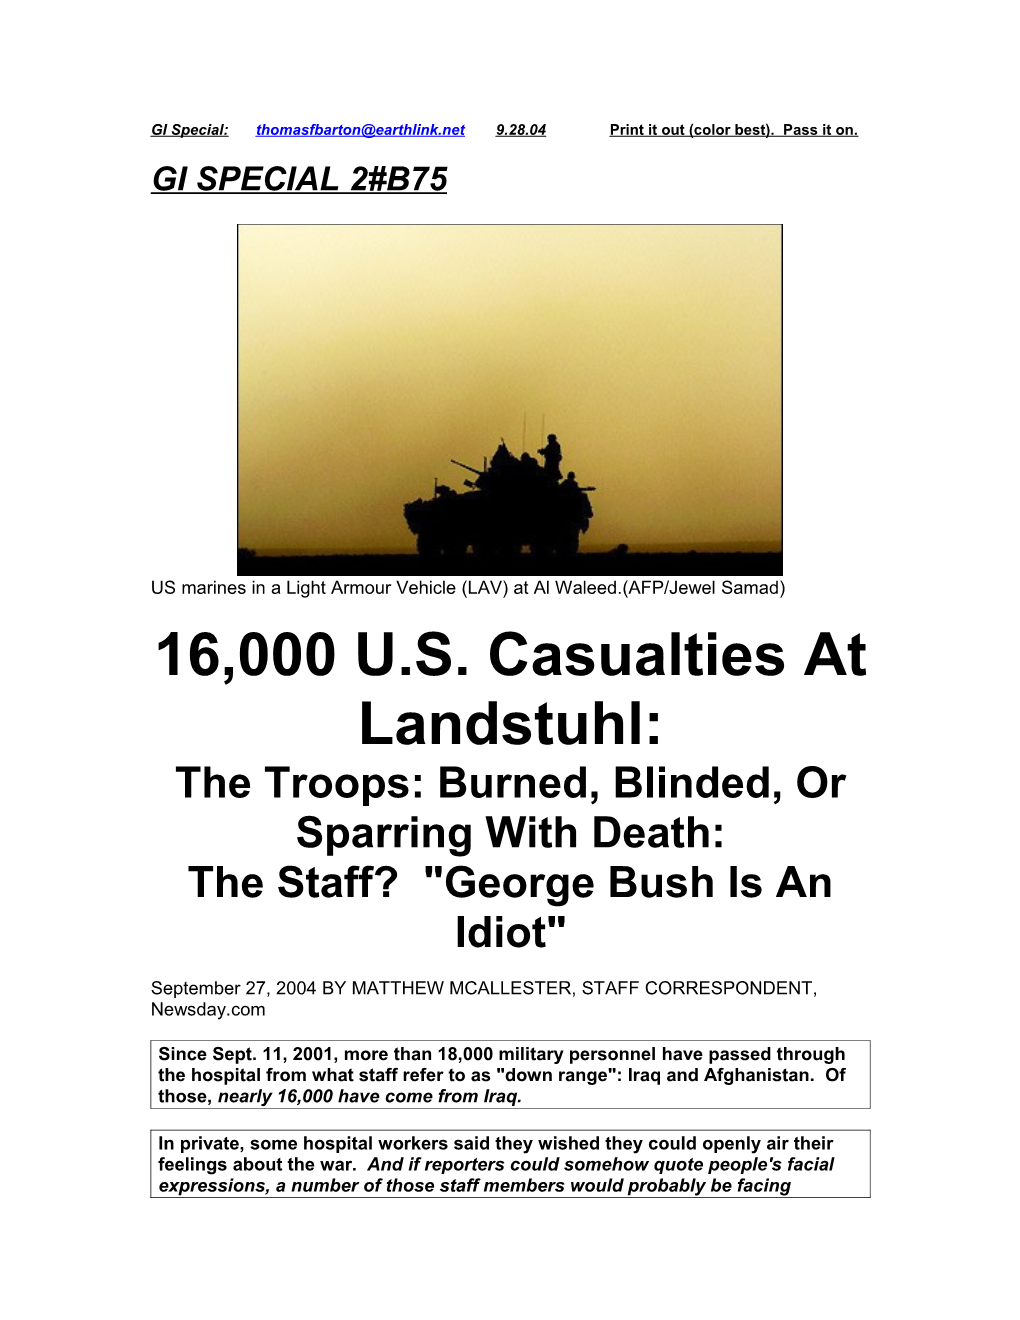 The Troops: Burned, Blinded, Or Sparring with Death